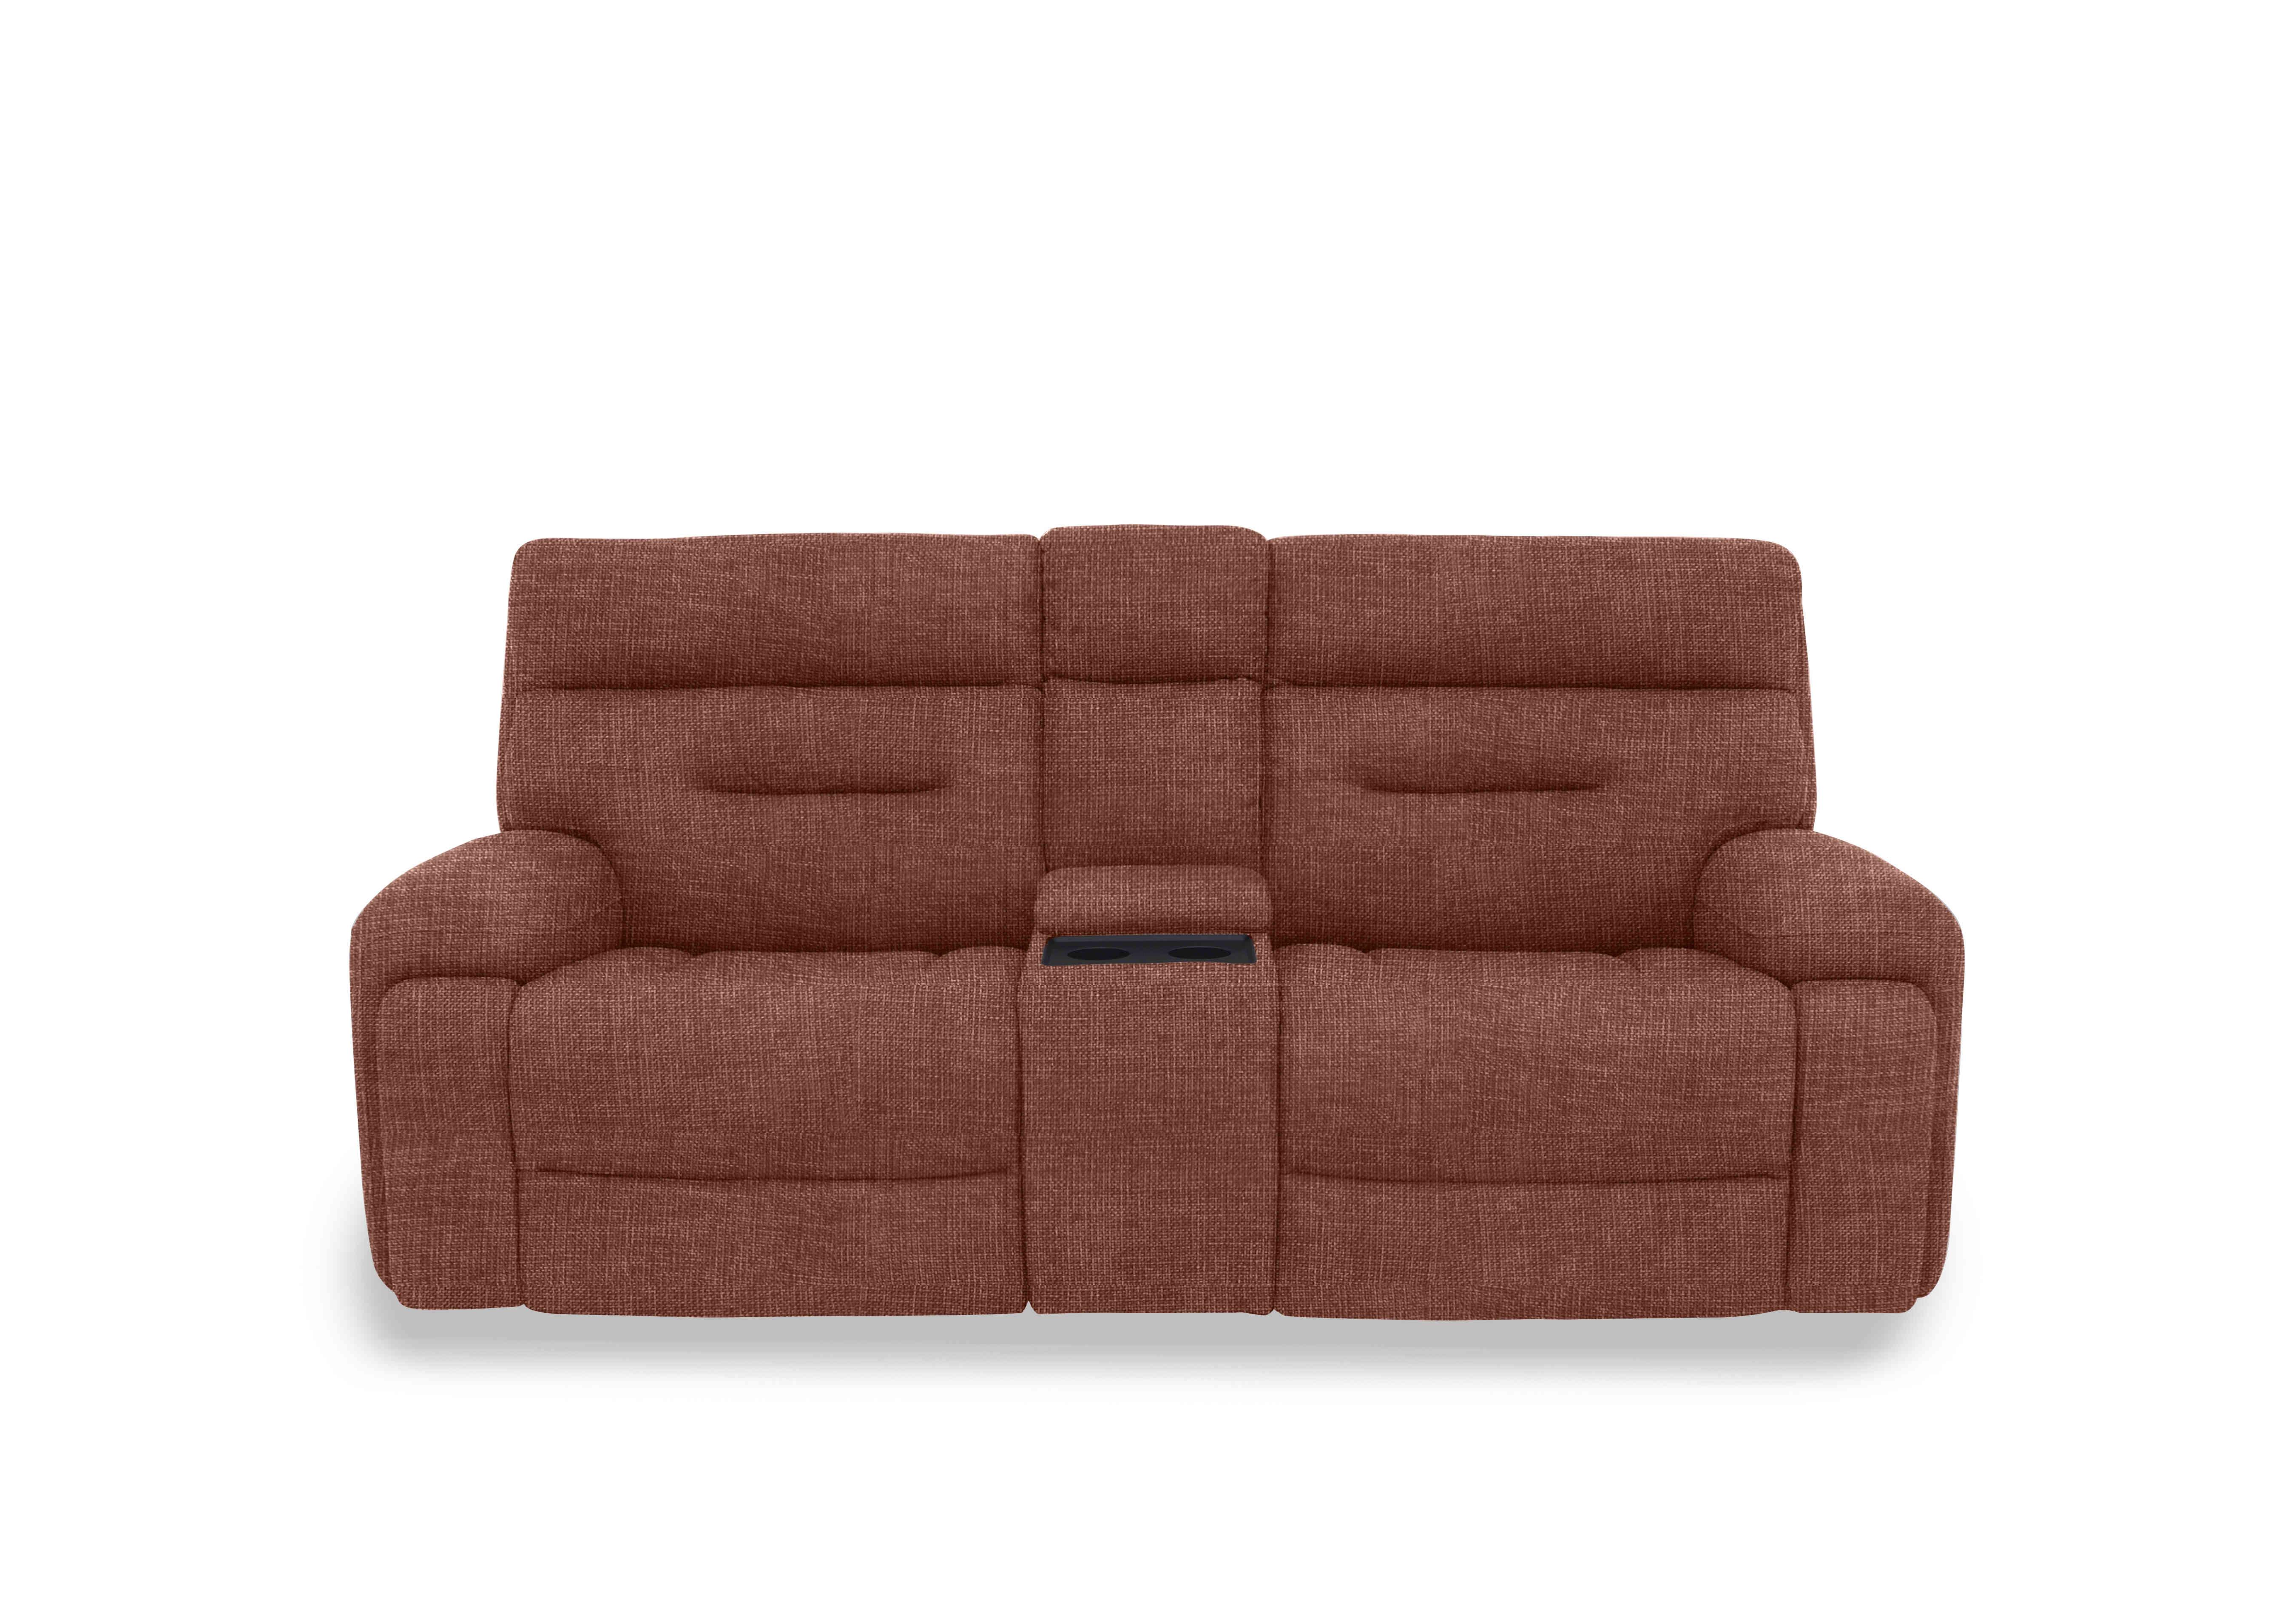 Cinemax Media 3 Seater Fabric Power Recliner Sofa with Power Headrests in Hf-0105 Halifax Red Maple on Furniture Village